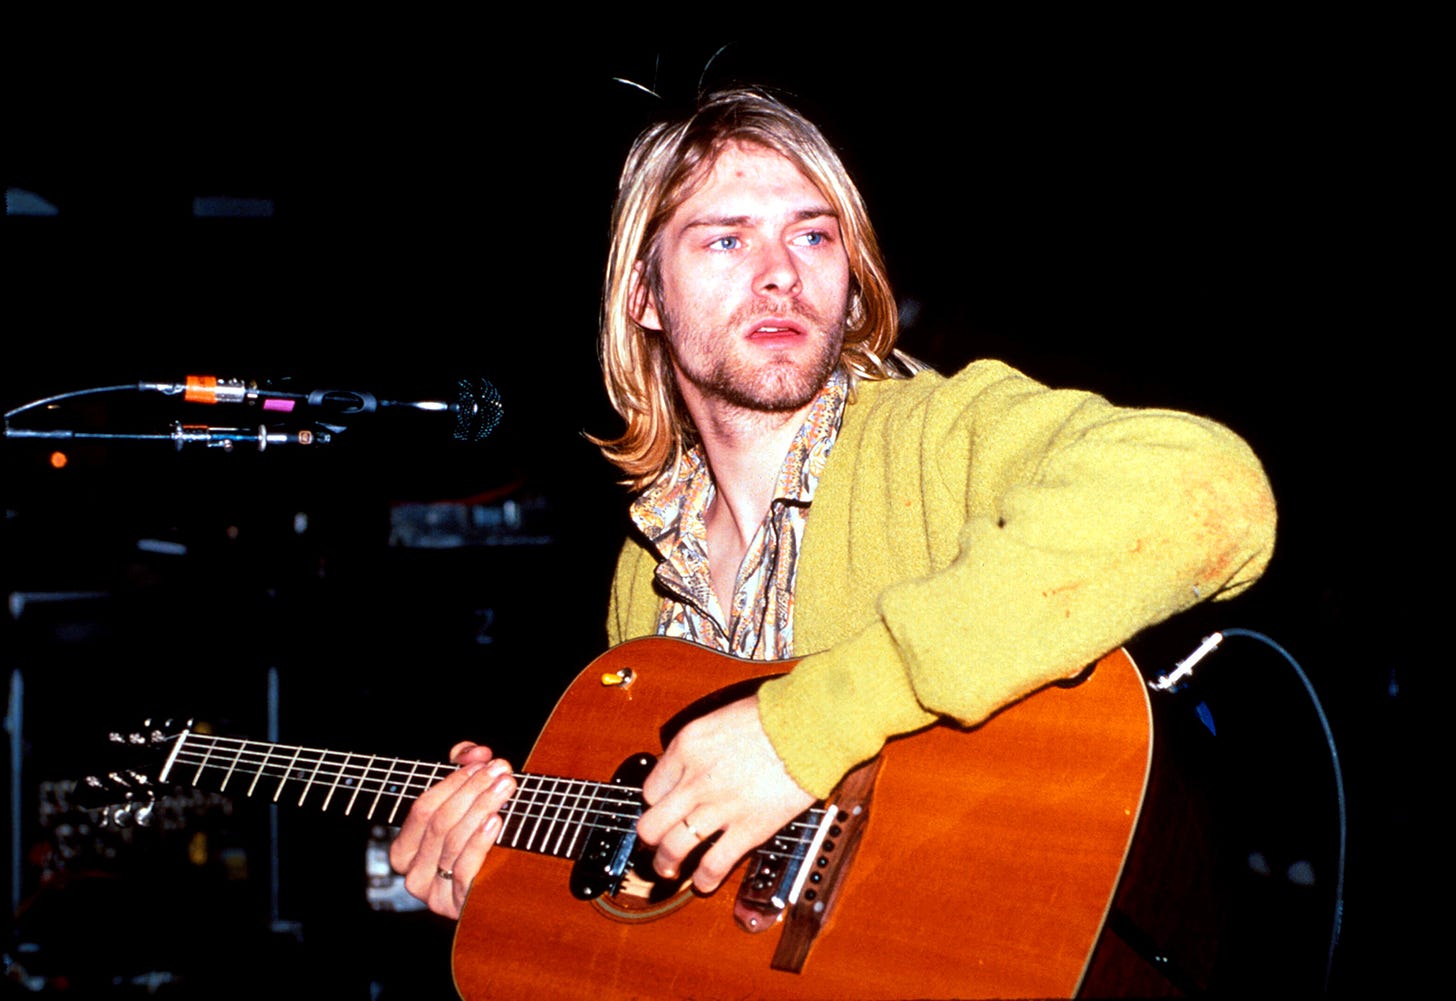 Nirvana, on 'Bleach' Tour, Play Chicago in 1989: Flashback